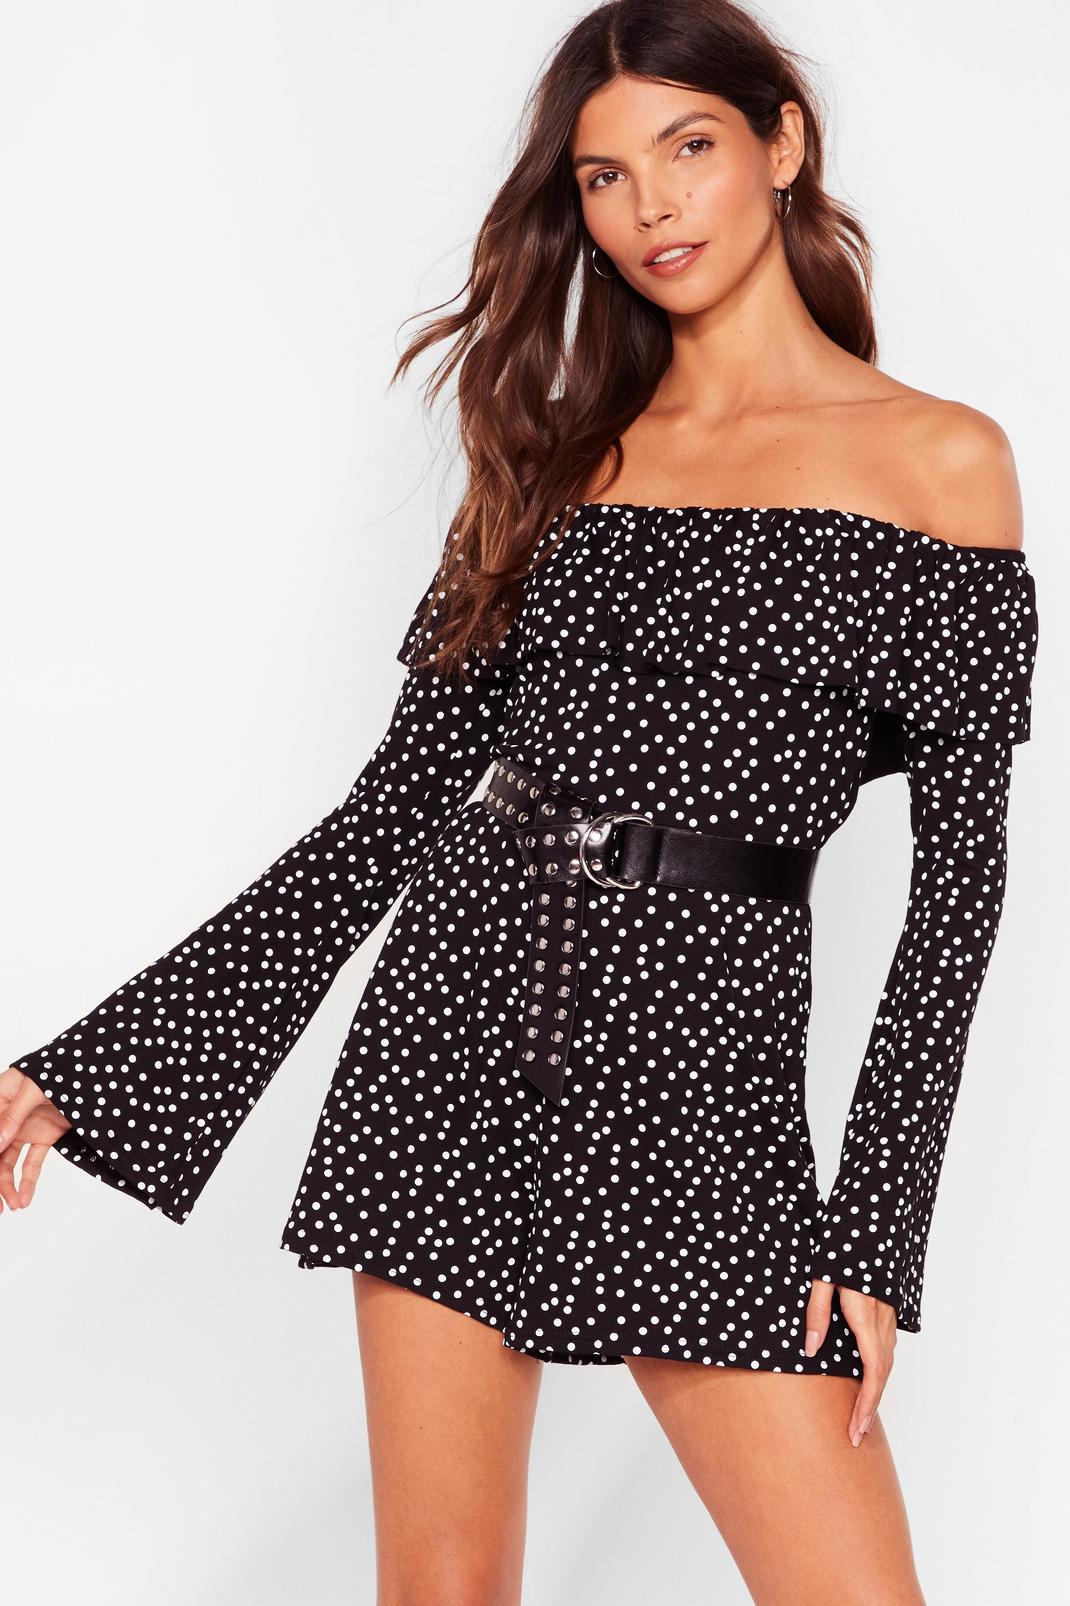 Life Keeps Lapping Polka Dot Romper image number 1